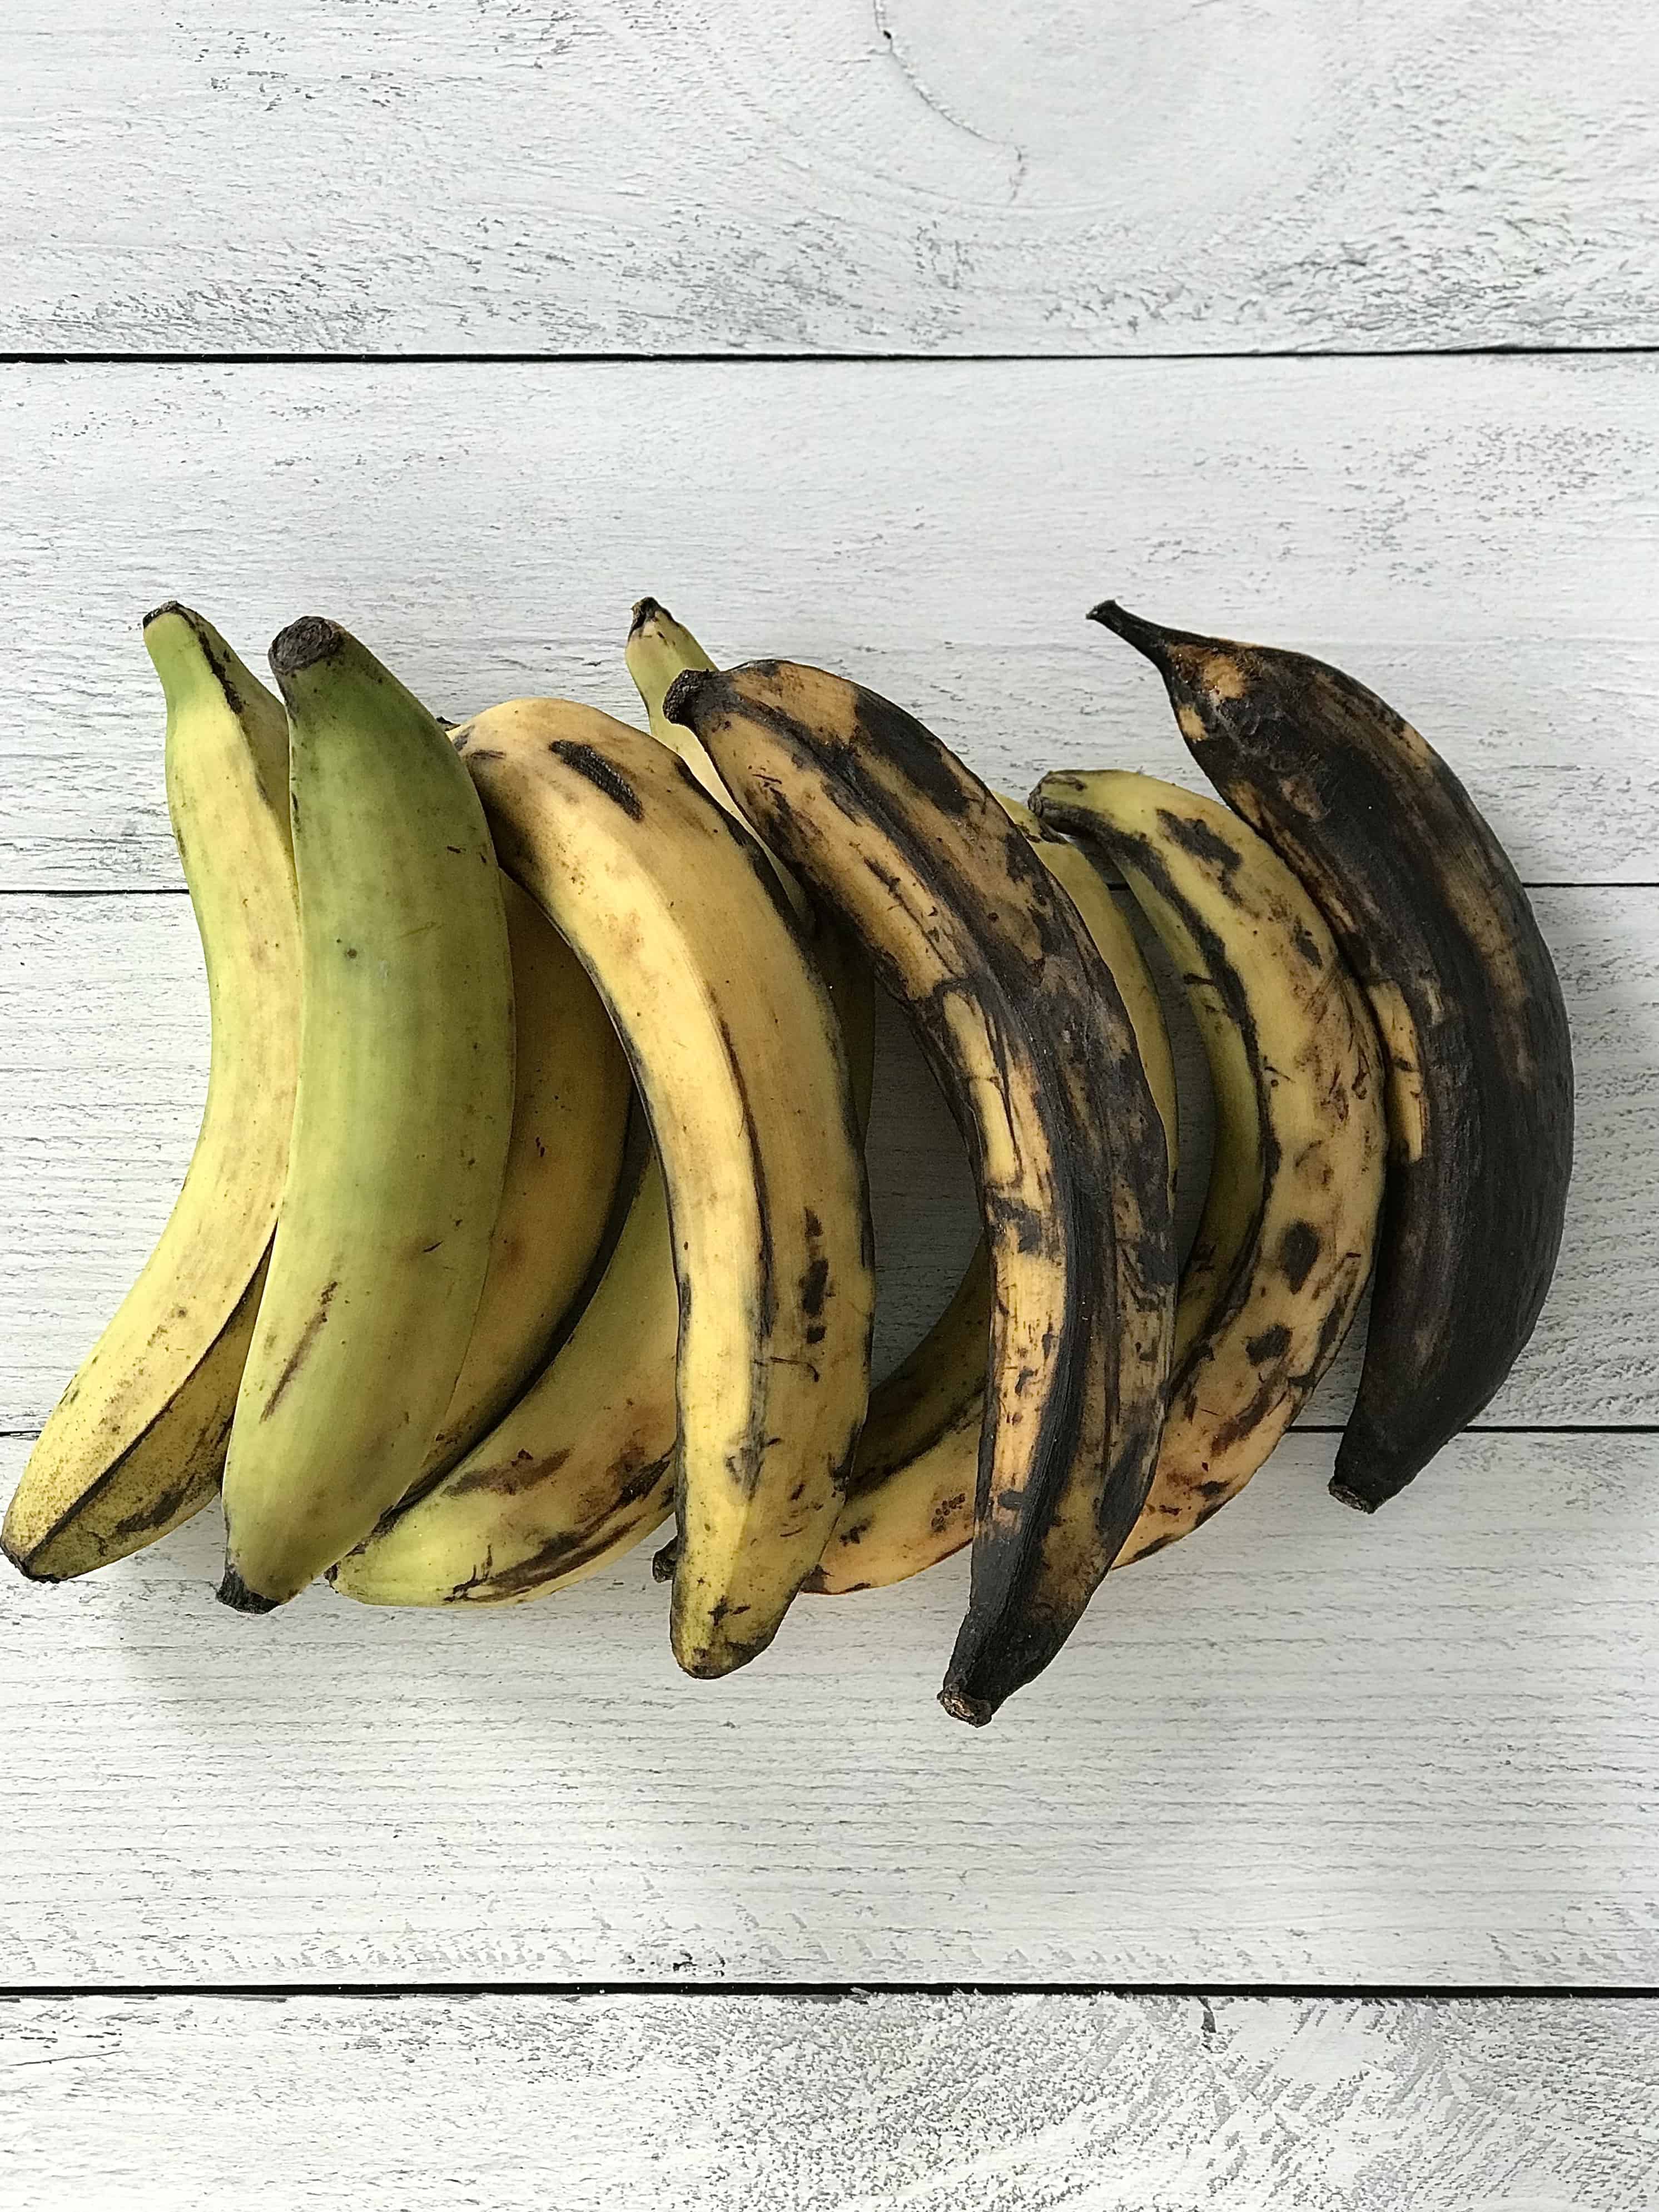 plantains in different stages of ripeness lined up on a white wooden table